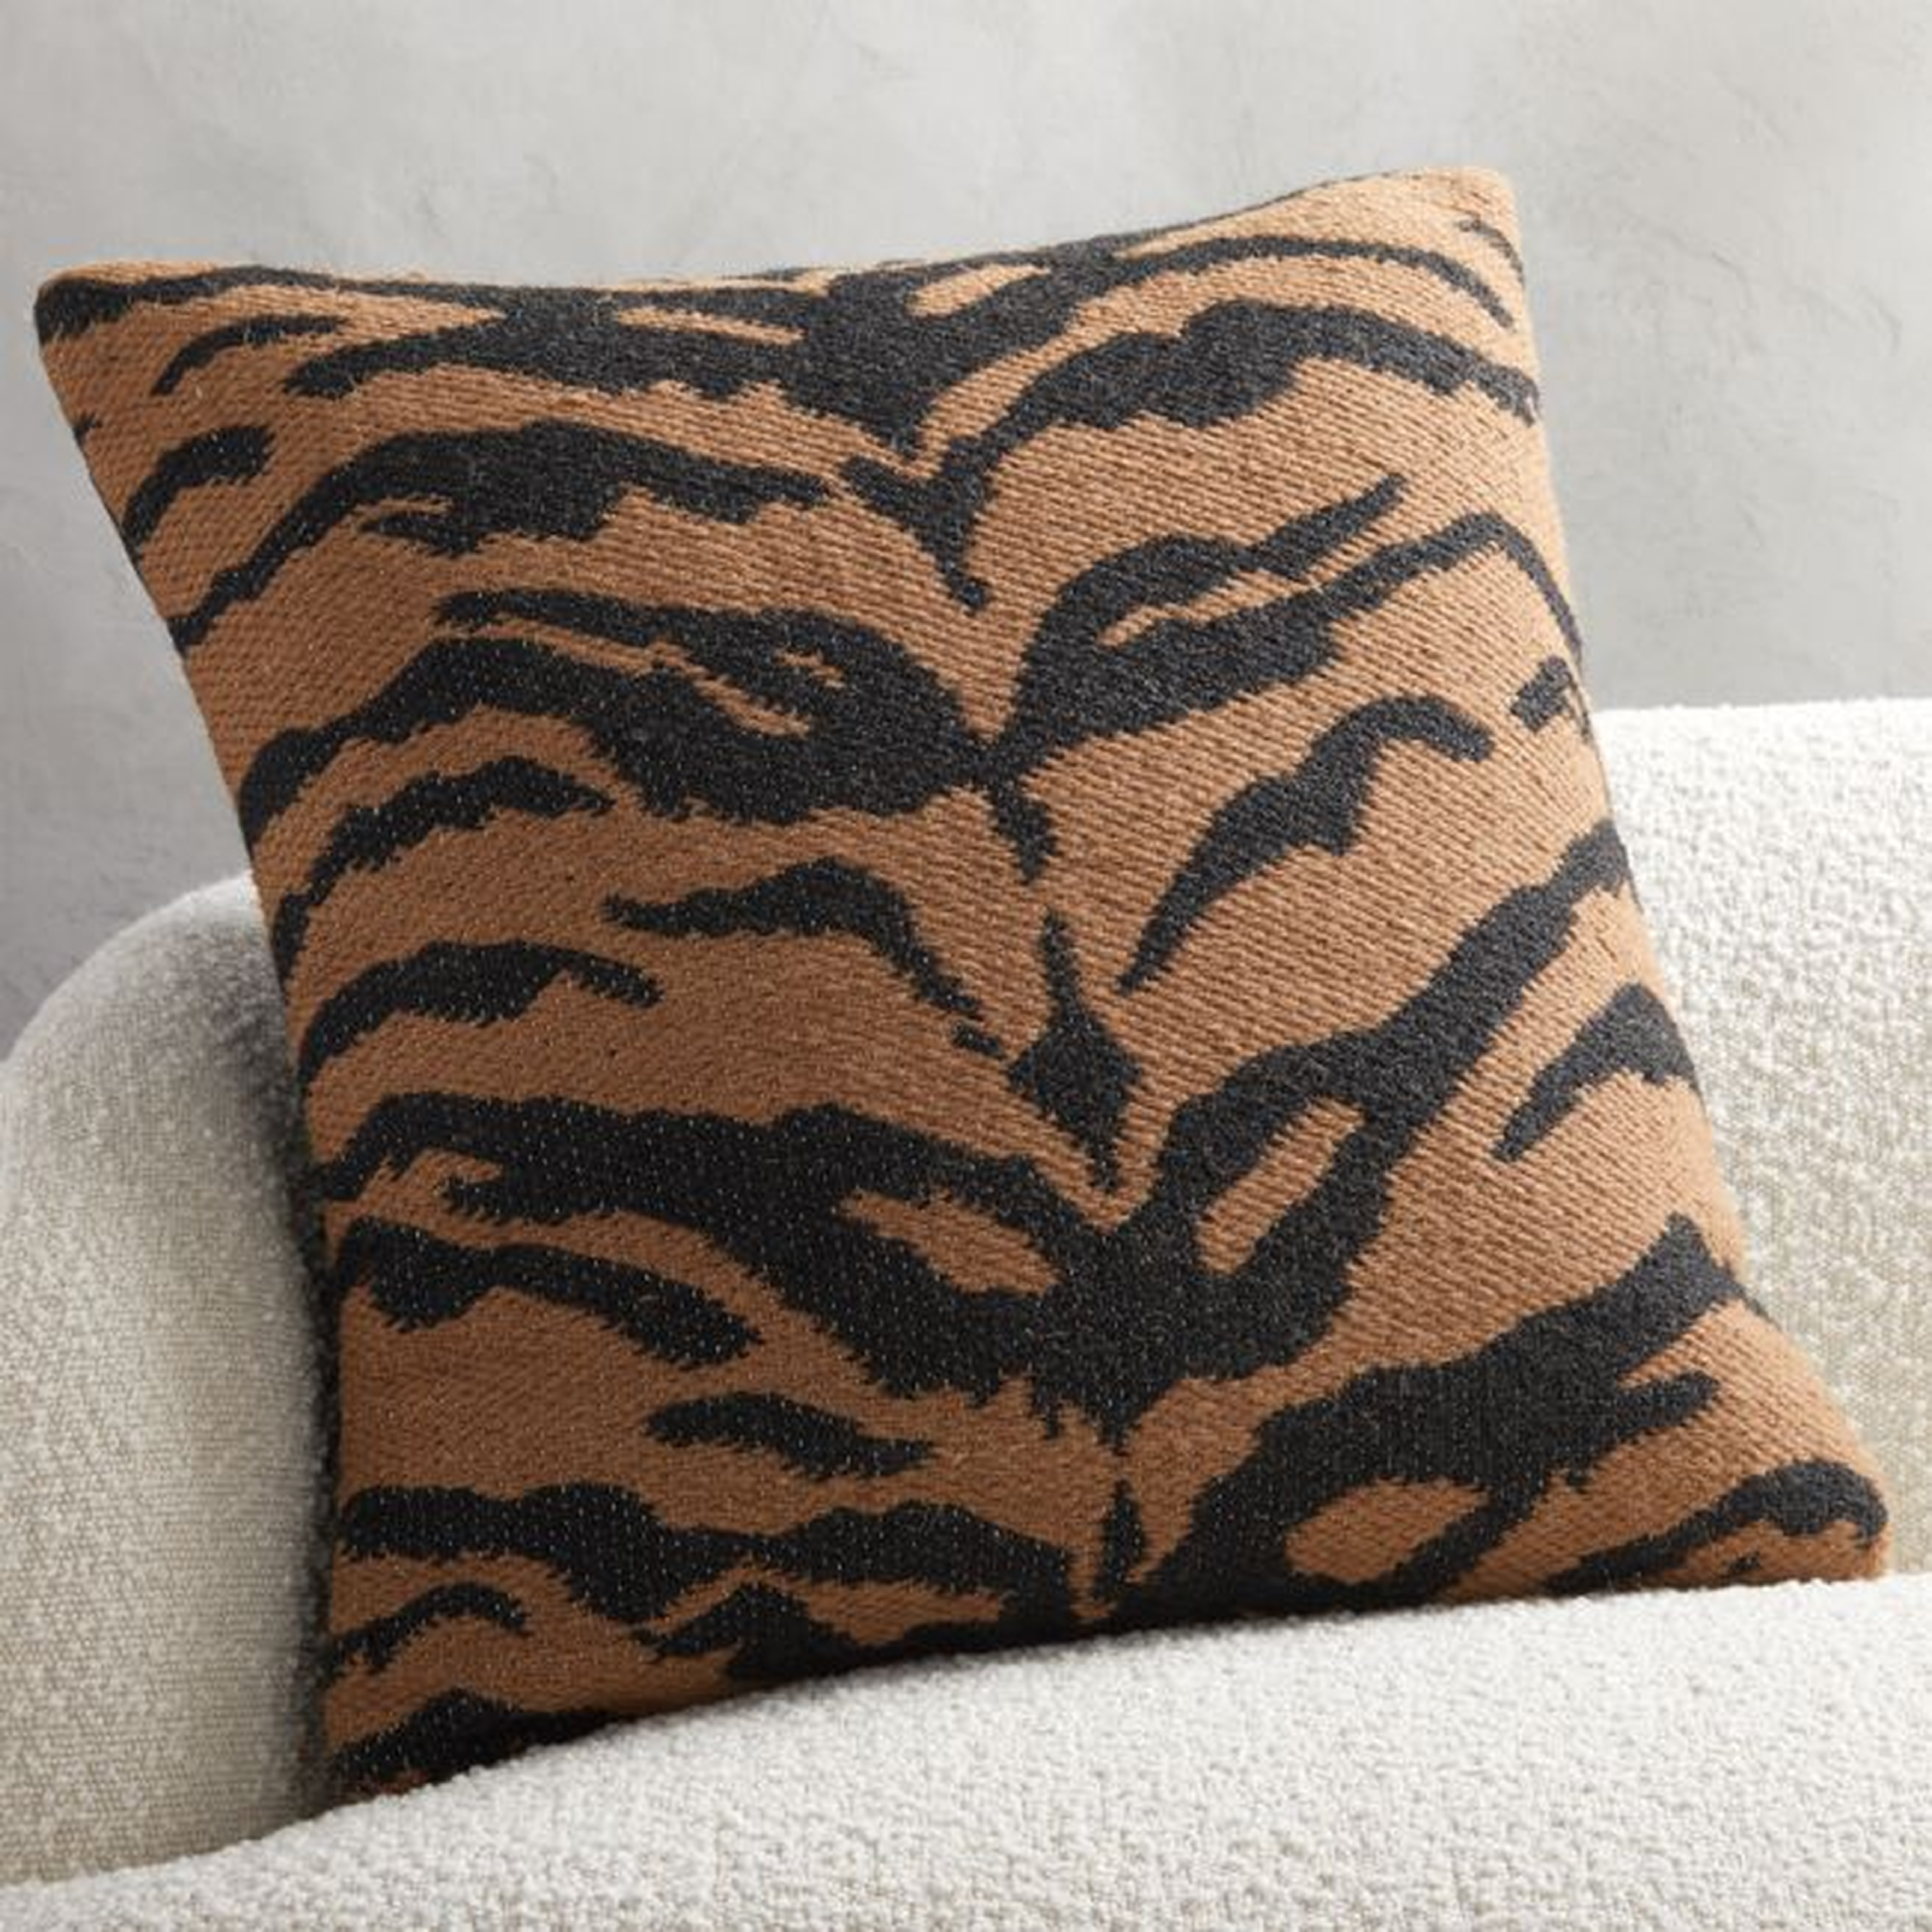 23" Jacquard Tiger Pillow with Feather-Down Insert - CB2